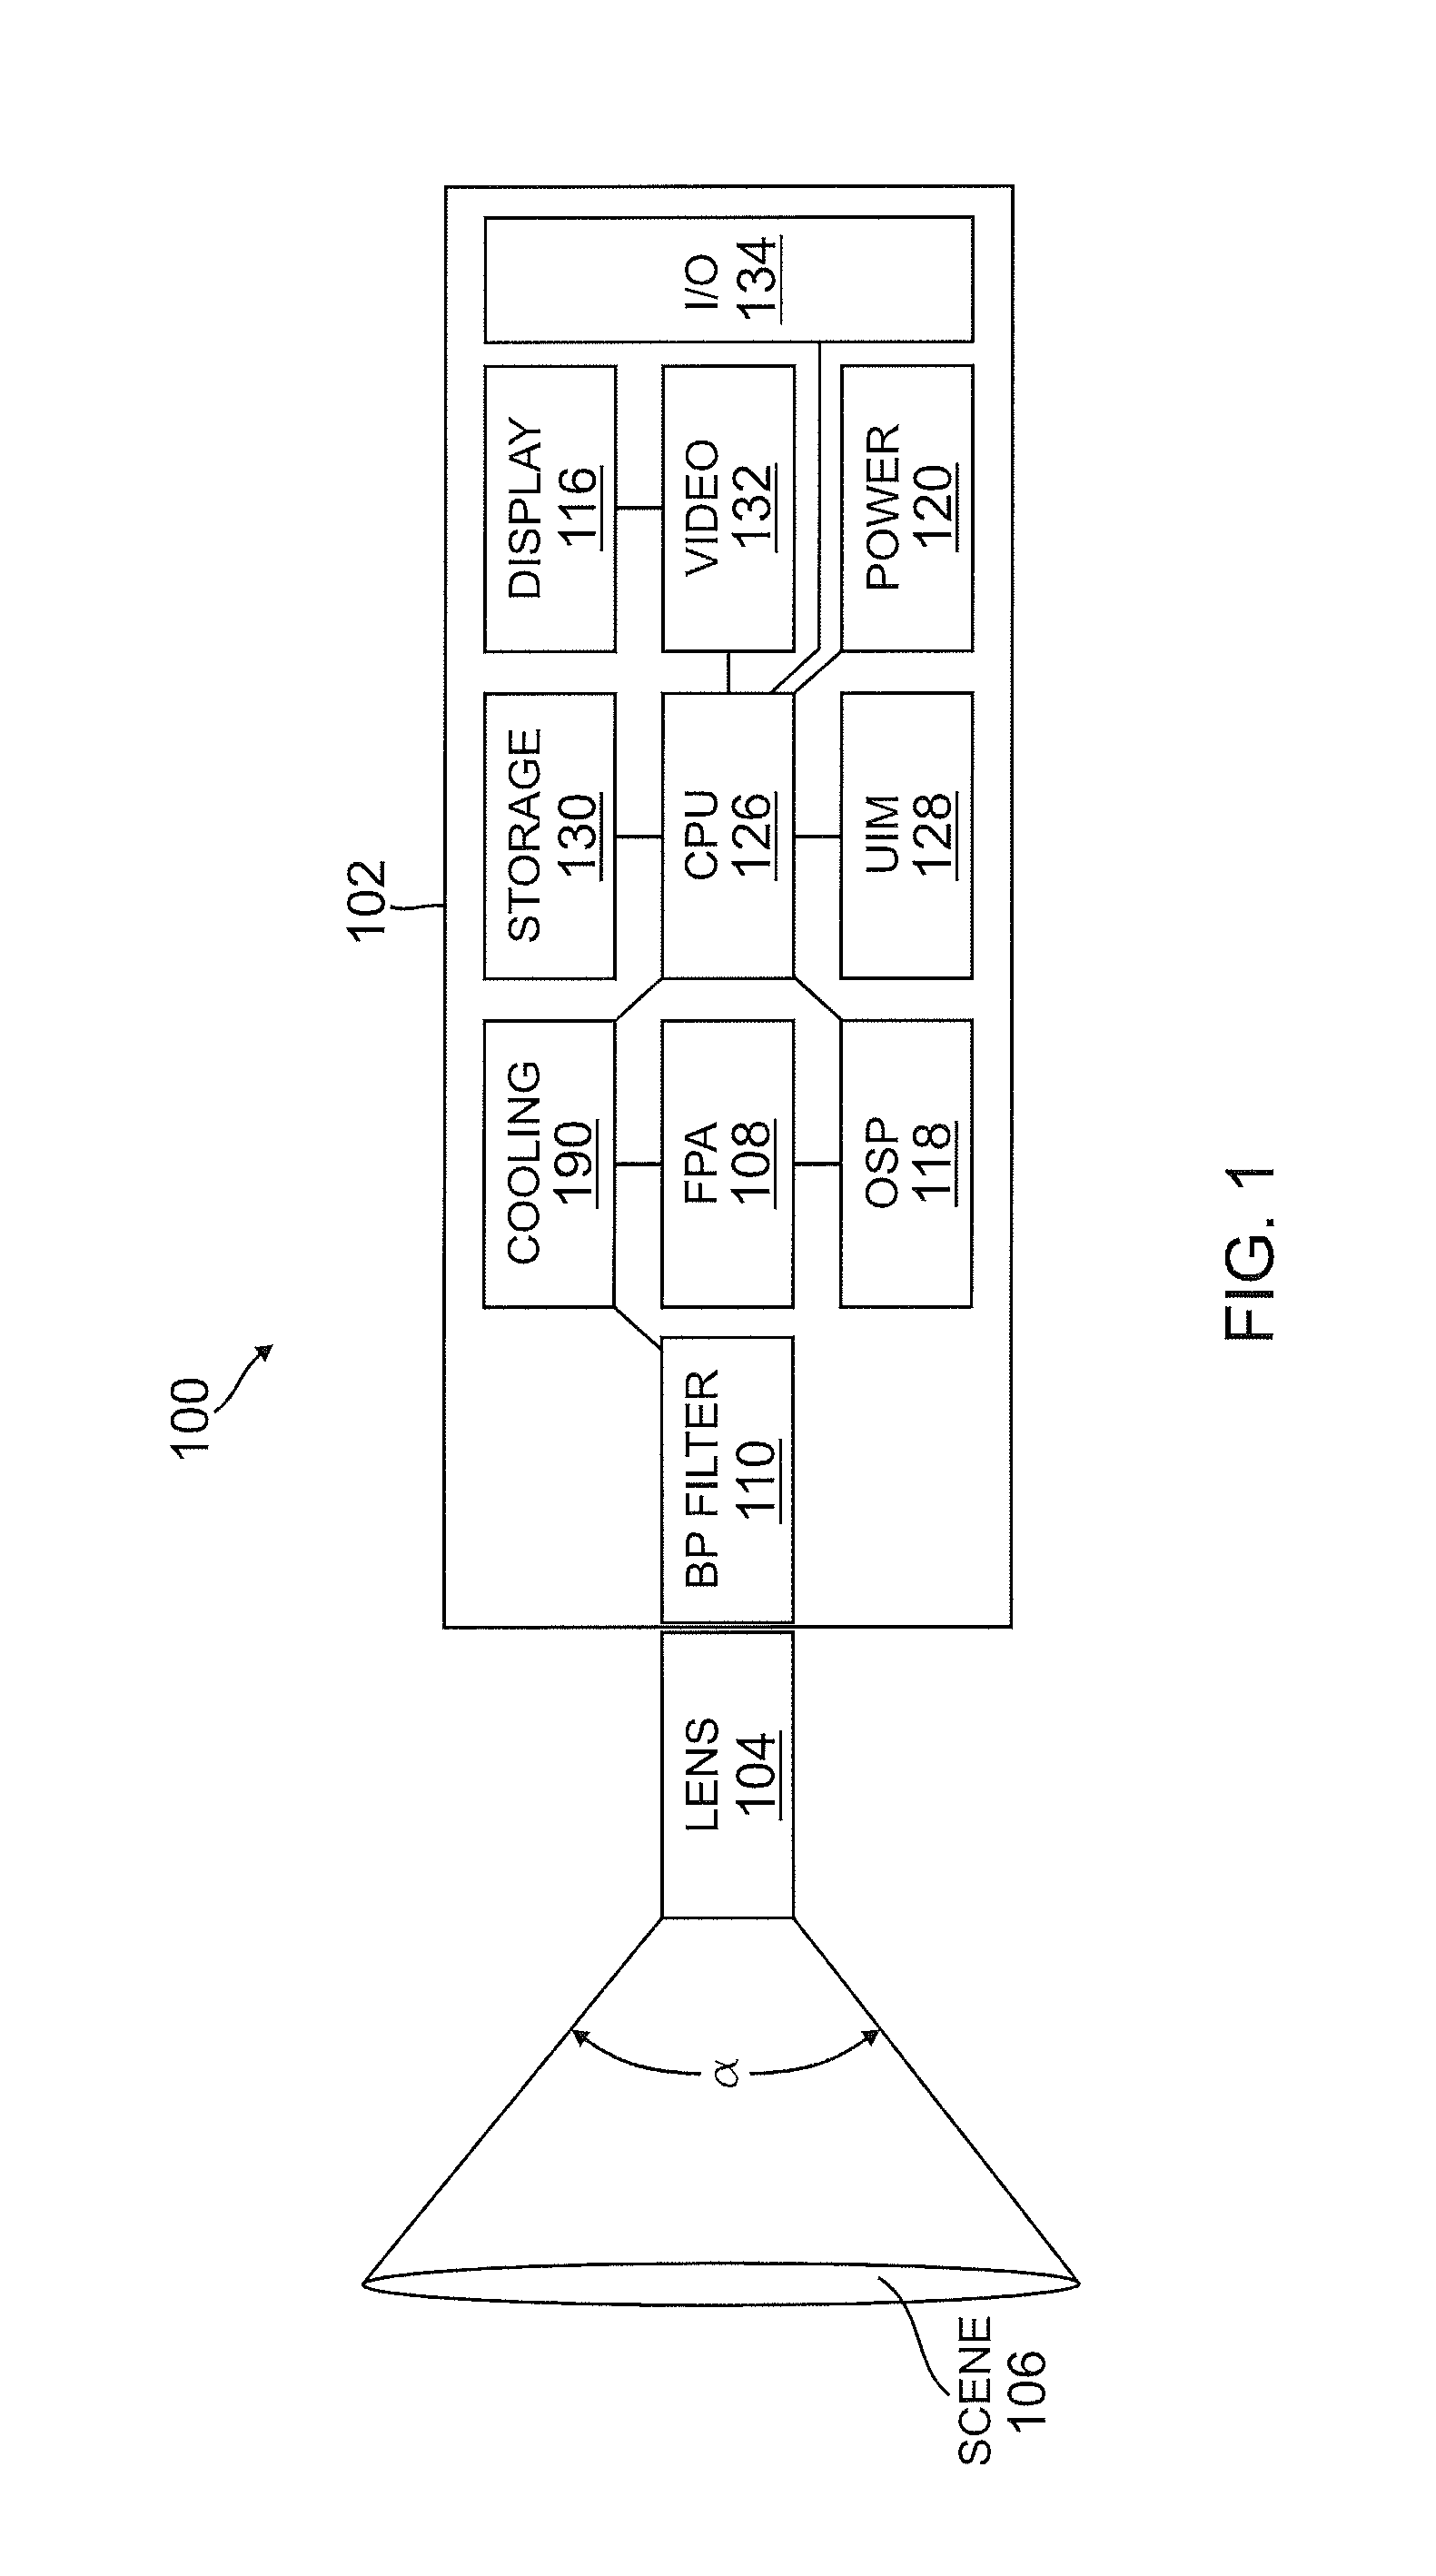 Thermography camera tuned to detect absorption of infrared radiation in a selected spectral bandwidth